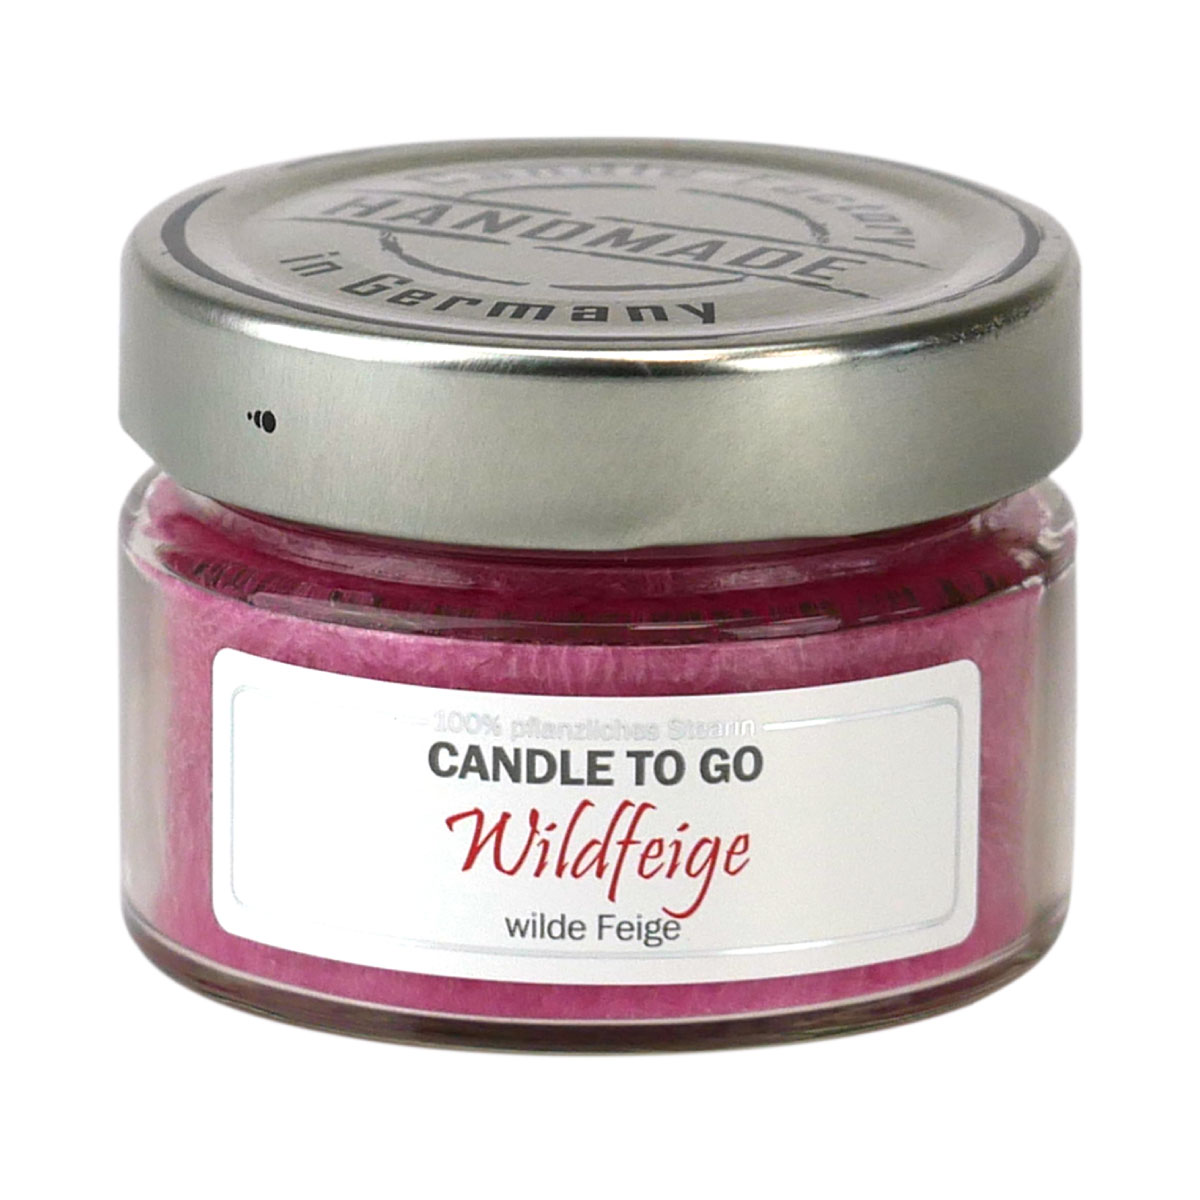 Wildfeige - Candle to Go Duftkerze von Candle Factory